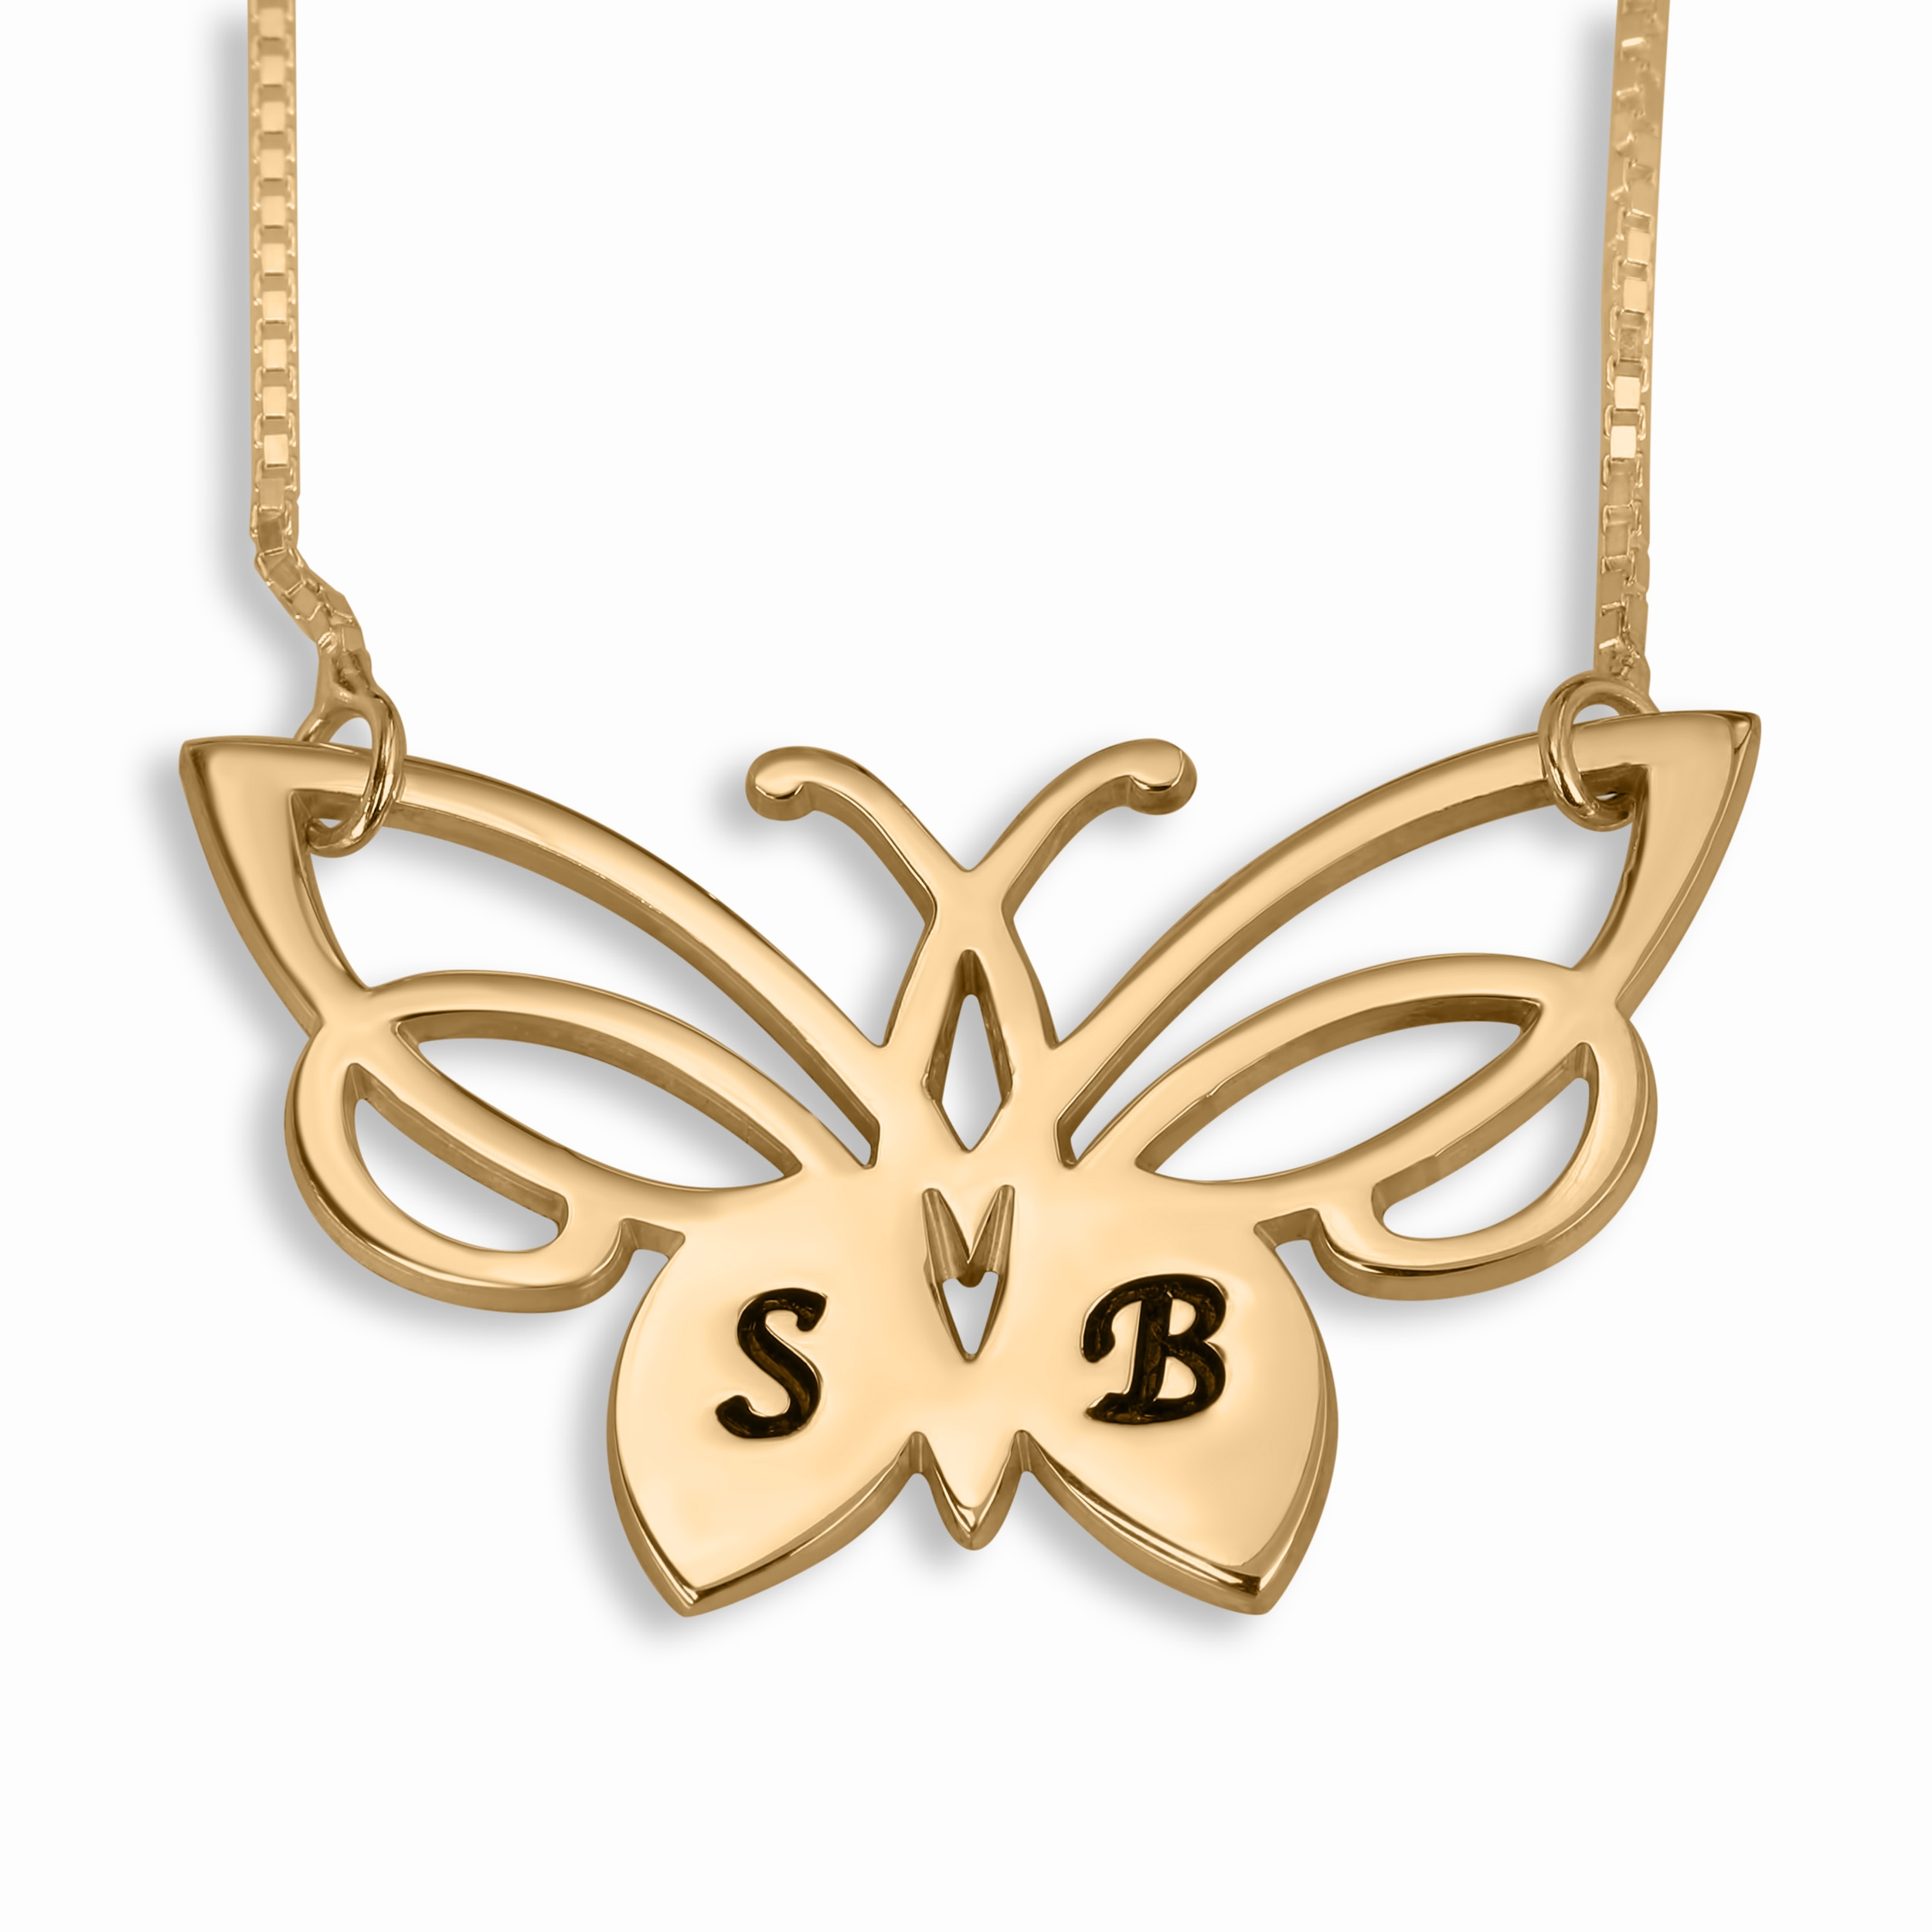 24k Rose Gold Plated Engraved Monogram Three Initials Heart Necklace